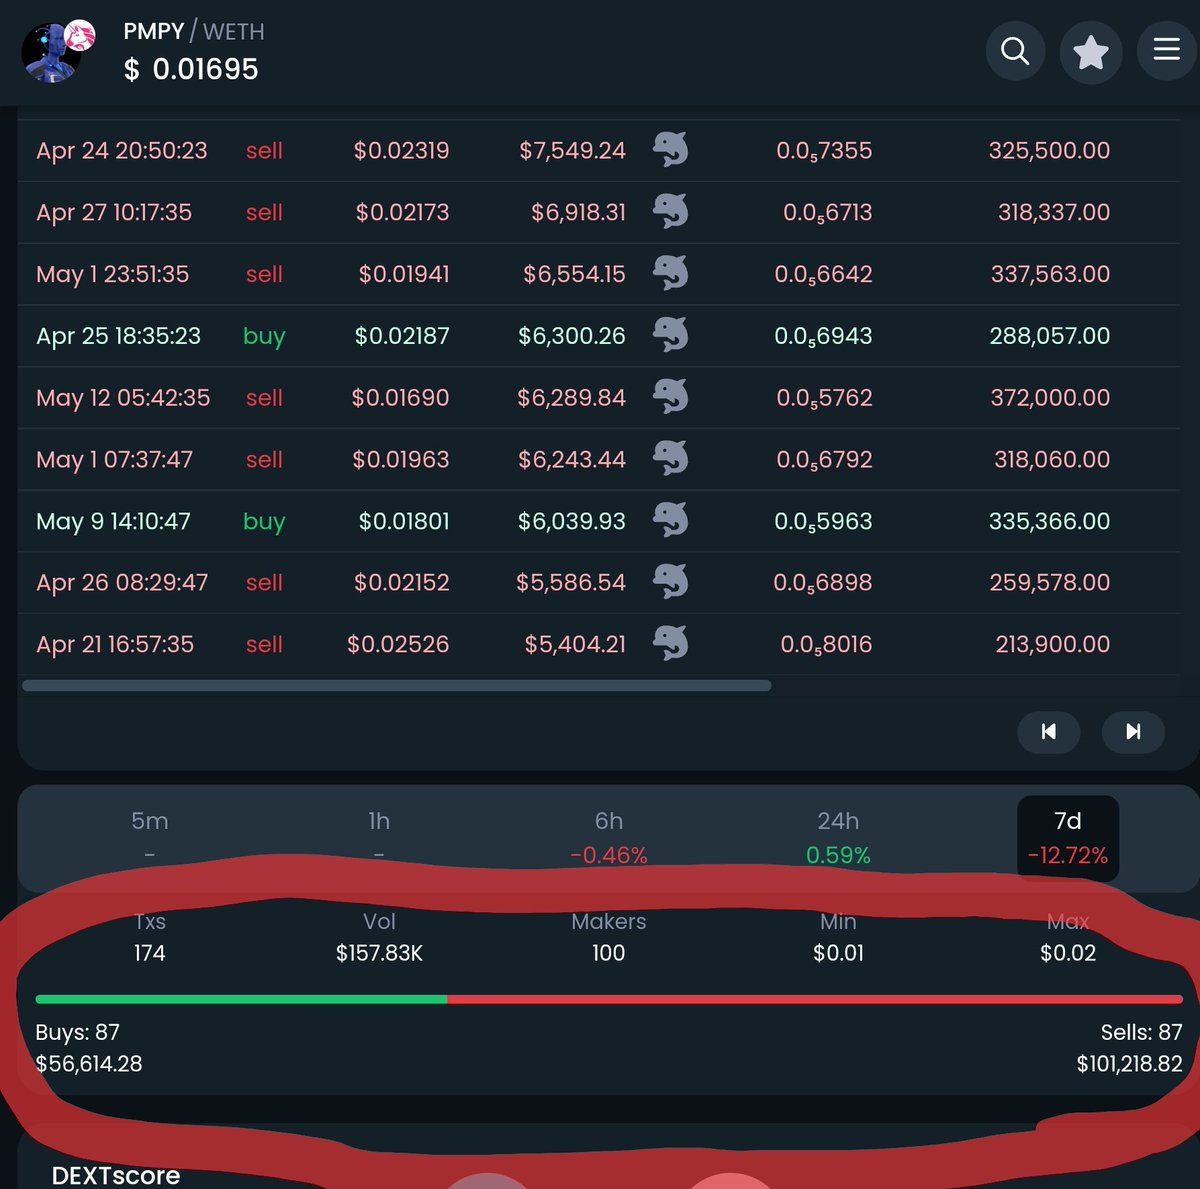 Almost double the exit as entry, and they claim they are buying, loading up, filling bags. They are lying, straight up lying to you. Follow the numbers folk, not the illusions they spin. Dont swallow their BS, its all smoke and mirrors here!  #prodigyflip $pmpy #scamtoken #PMPY